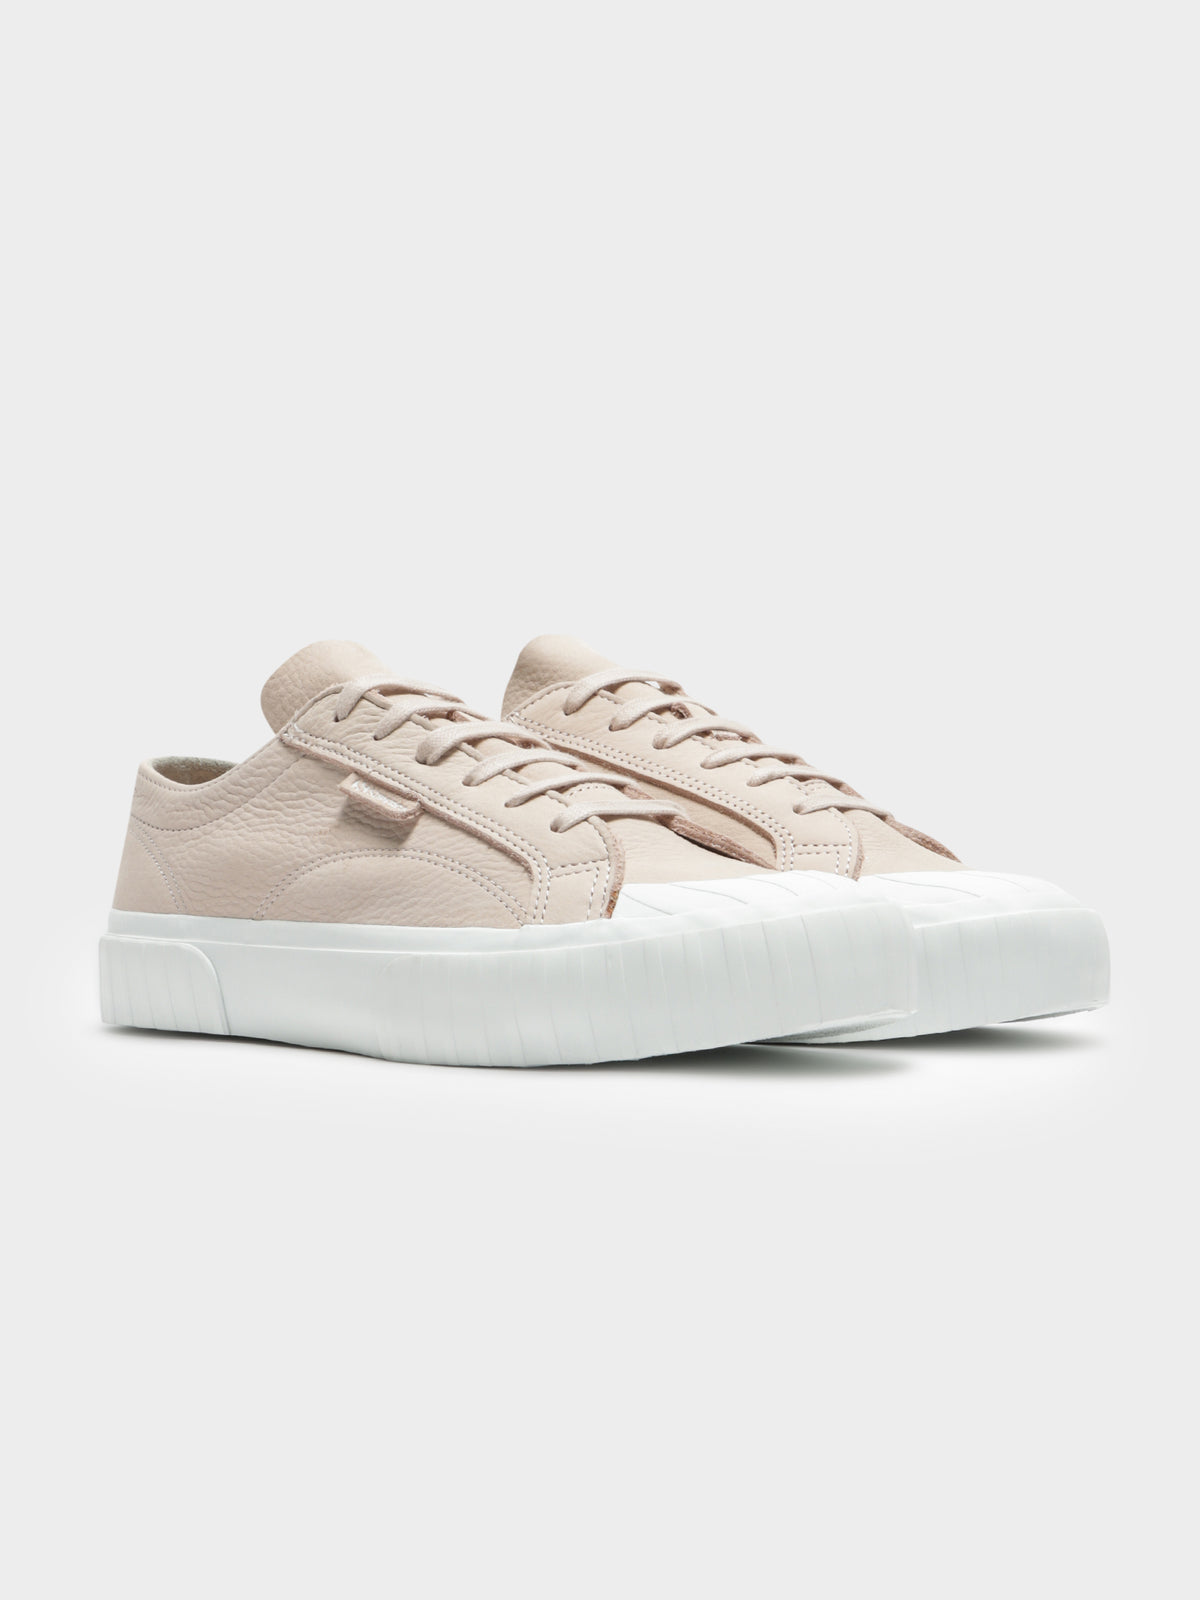 Womens 2630 Stripe Buttersoft Sneakers in Pink Blush